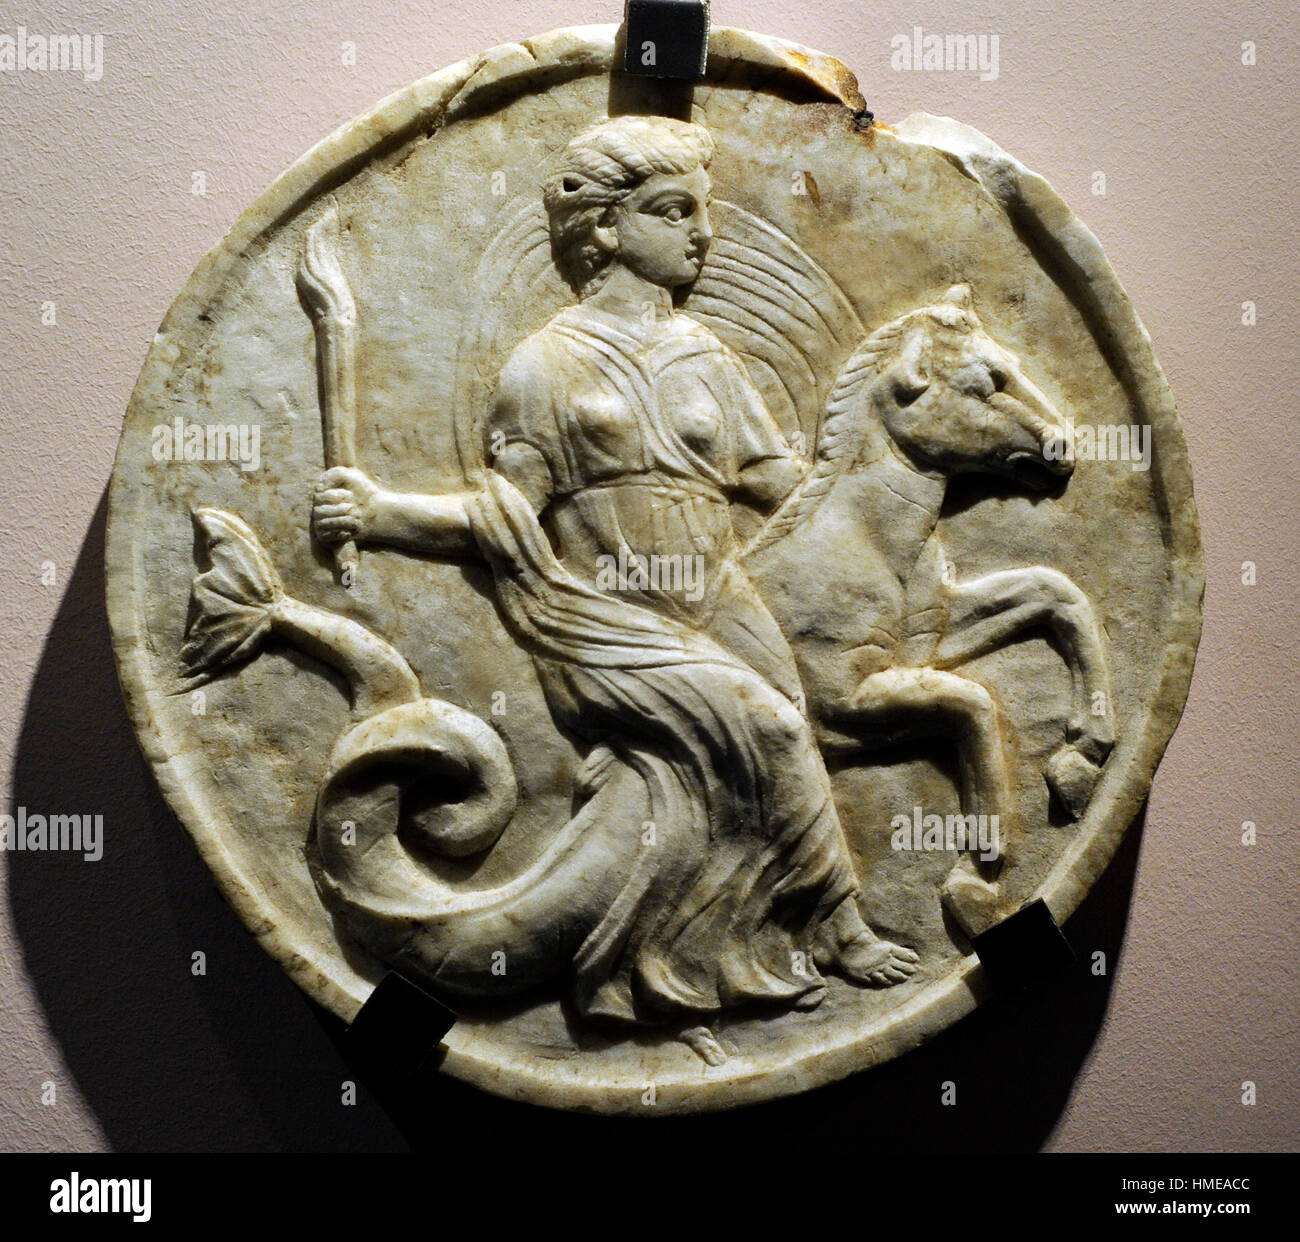 Oscillum with Nereid on seahorse. Late 1st century BC. From Pompeii, House of Caecilius Iucundus V 1, 23-26. Marble. National Archeological Museum. Naples. Italy. Stock Photo